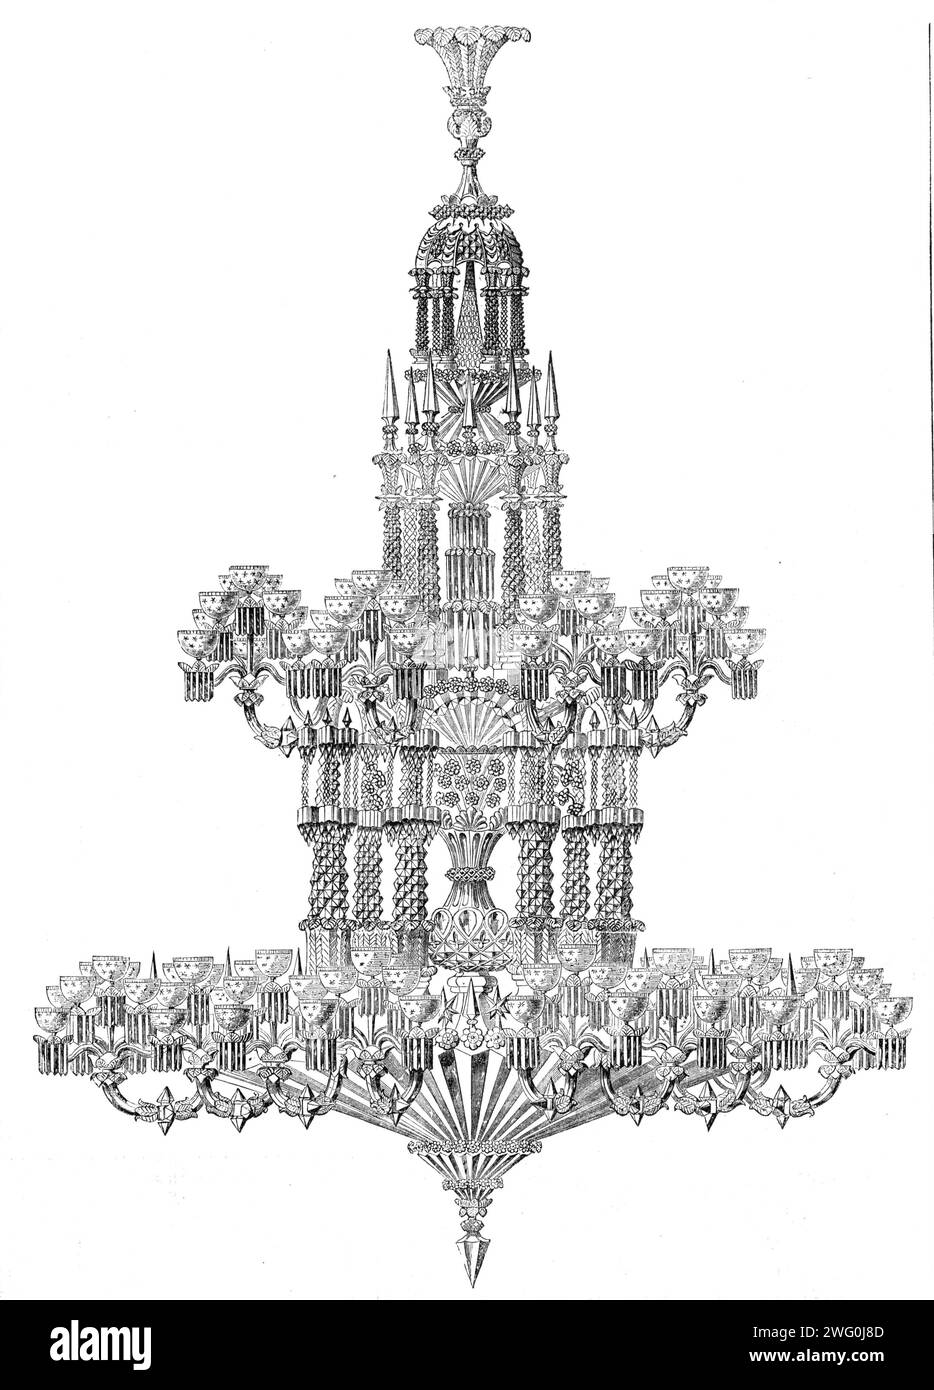 The Great Chandelier by Defries in the International Exhibition, 1862. The 'largest chandelier in the world', made from '...thousands of pieces of cut and polished glass, weighing altogether about three tons. This amazing bulk, however, was the cause of a mistaken alarm...for, upon the falling of two or three of the prisms, the space beneath was railed off and protected by a body of police...It was shown, however, that the frame and fastenings had been tested to more than three times the weight of the chandelier, and that the fall of the prisms was only to be attributed to some negligence on t Stock Photo